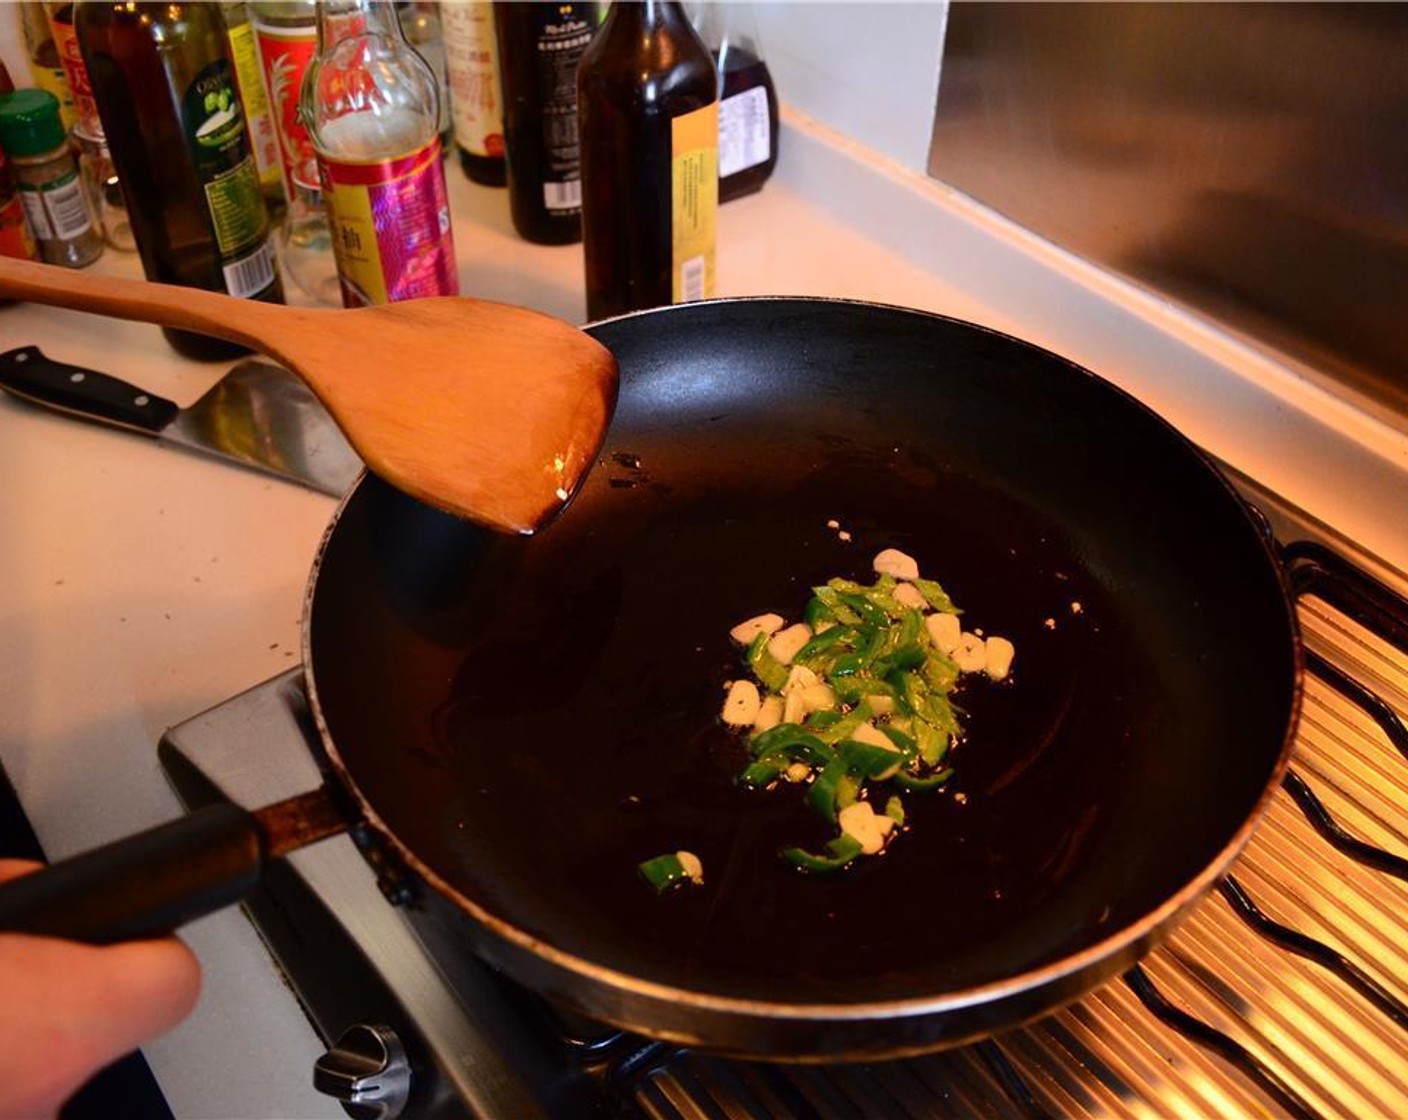 step 4 In a pan, heat the Olive Oil (1 Tbsp) and sauté the garlic and the chili pepper for about 1-2 minutes.